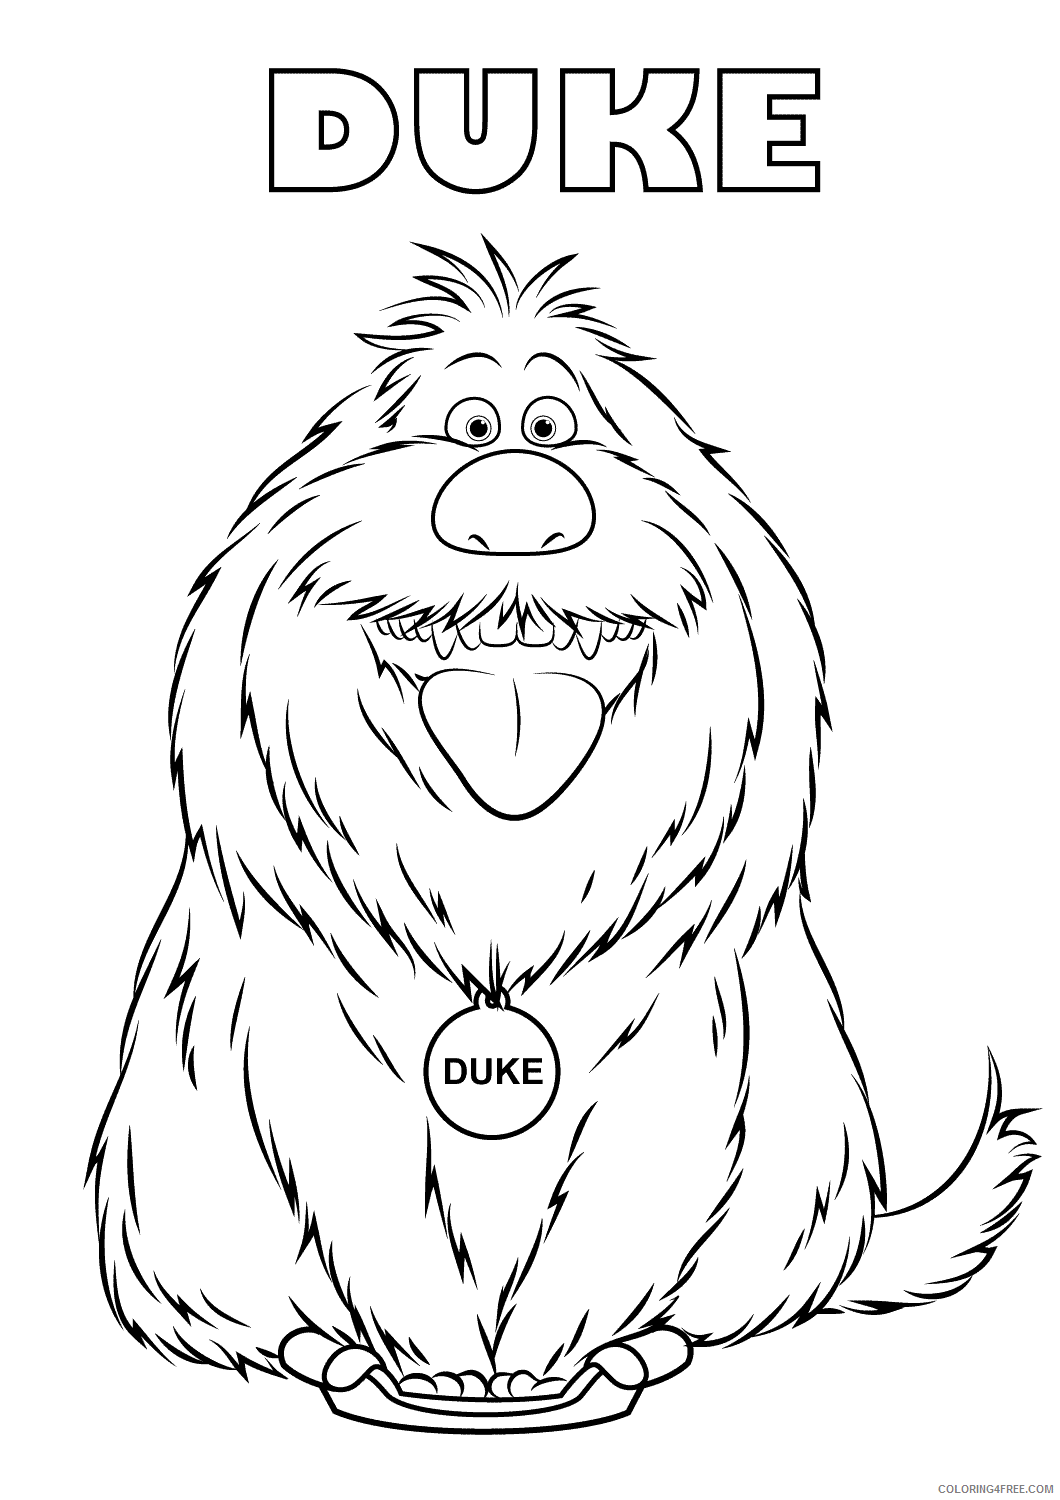 The Secret Life of Pets Coloring Pages TV Film Duke Printable 2020 09486 Coloring4free